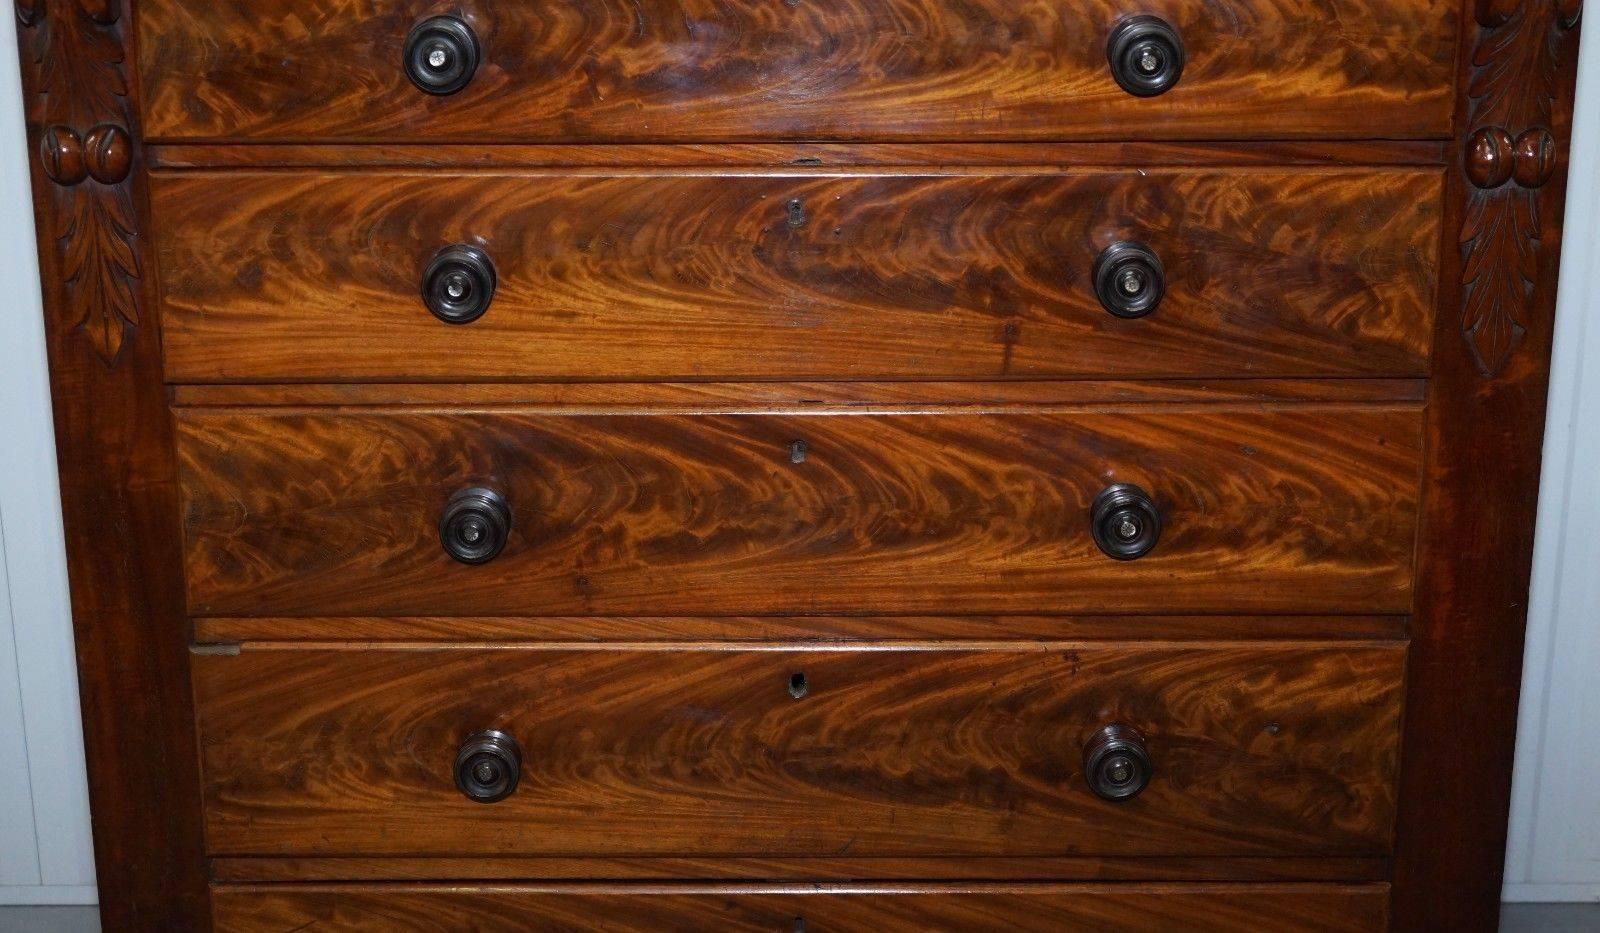 British Huge Victorian Flamed Mahogany Chest of Drawers Handmade Absolutely Stunning